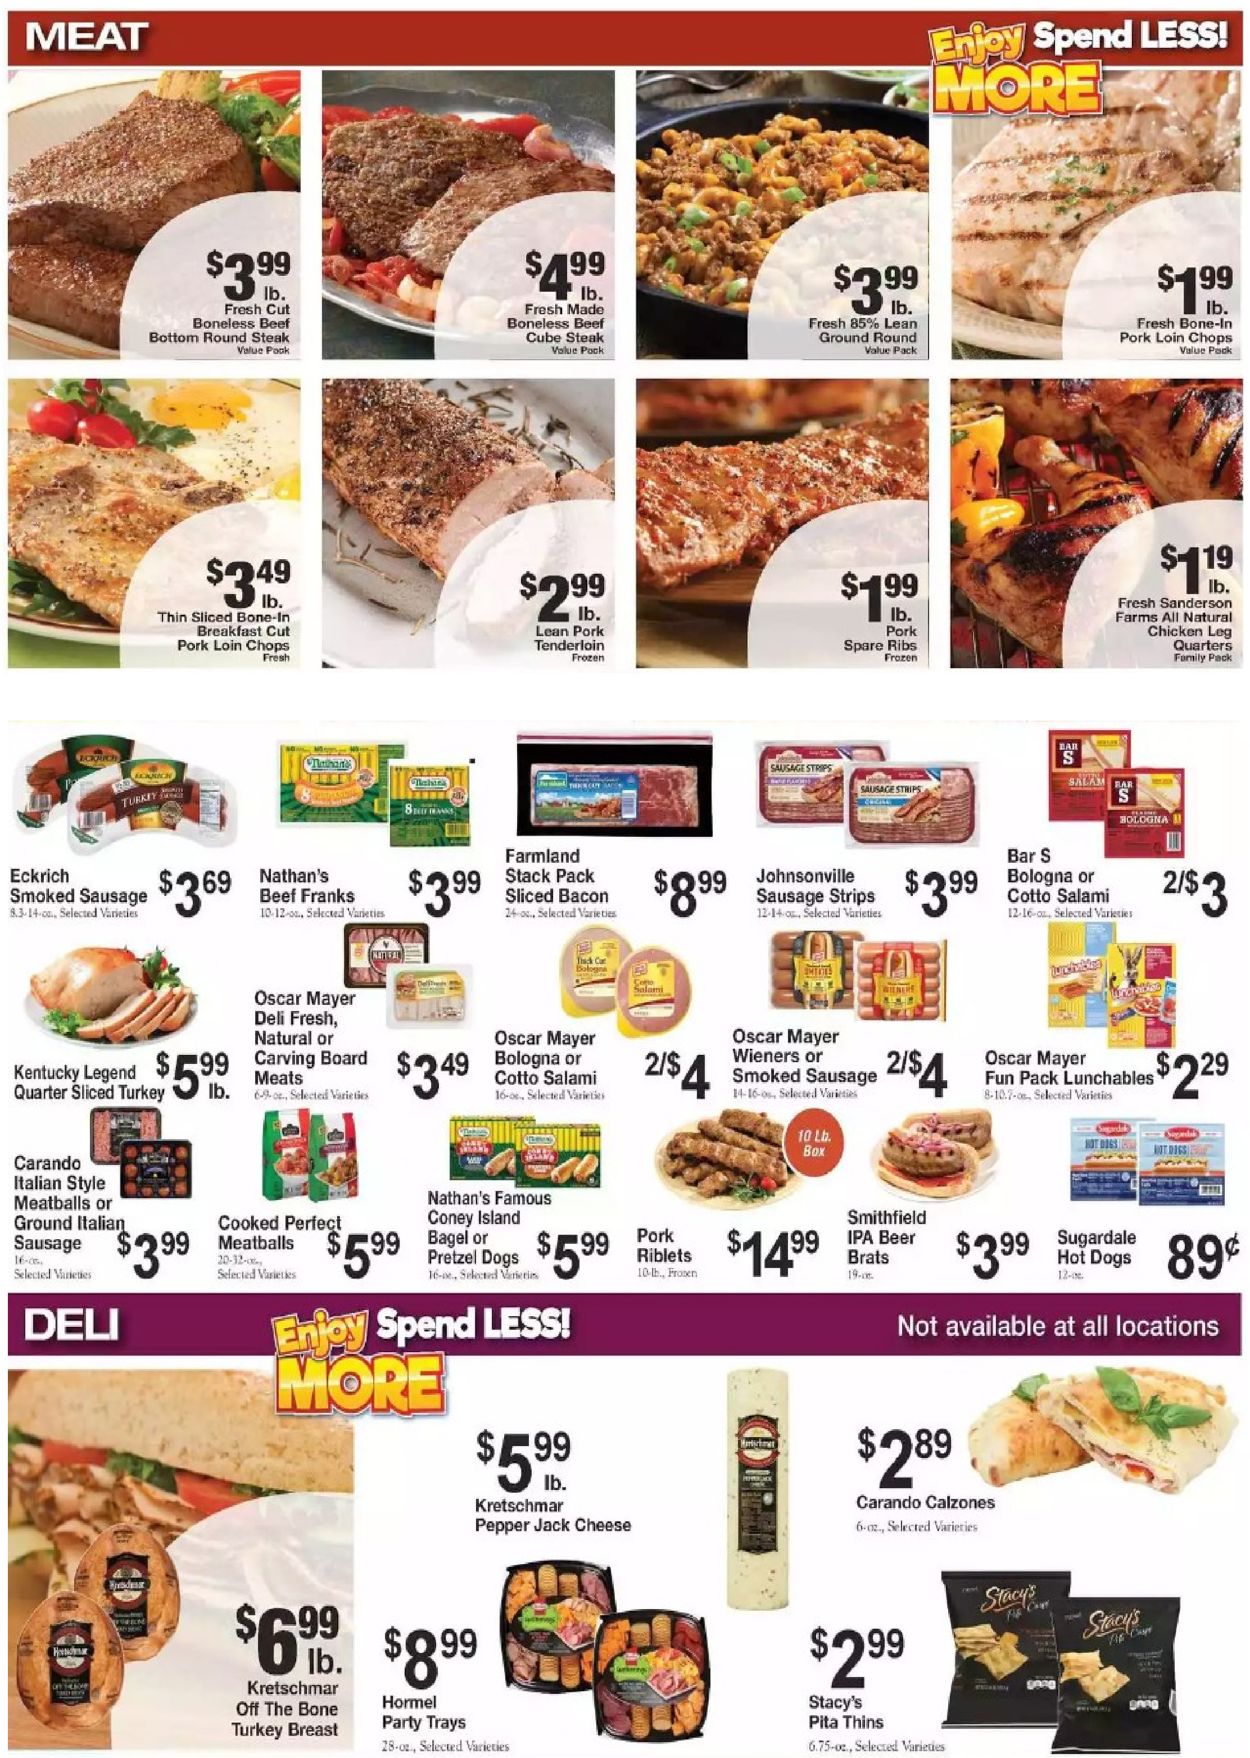 Country Mart Ad from 01/12/2021